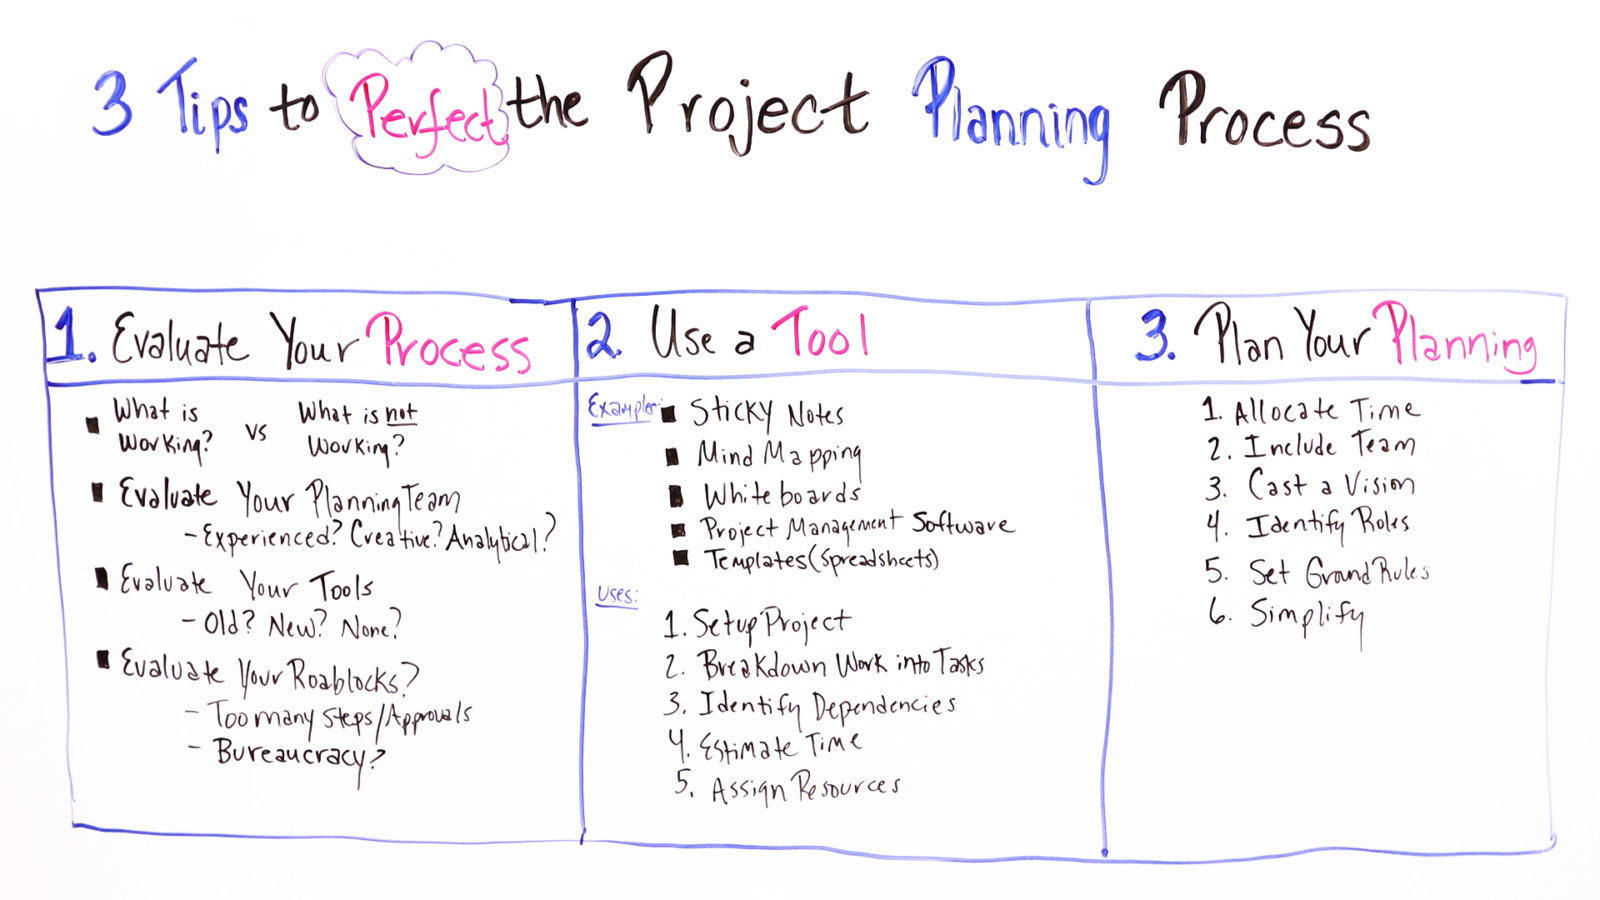 assignment of process steps